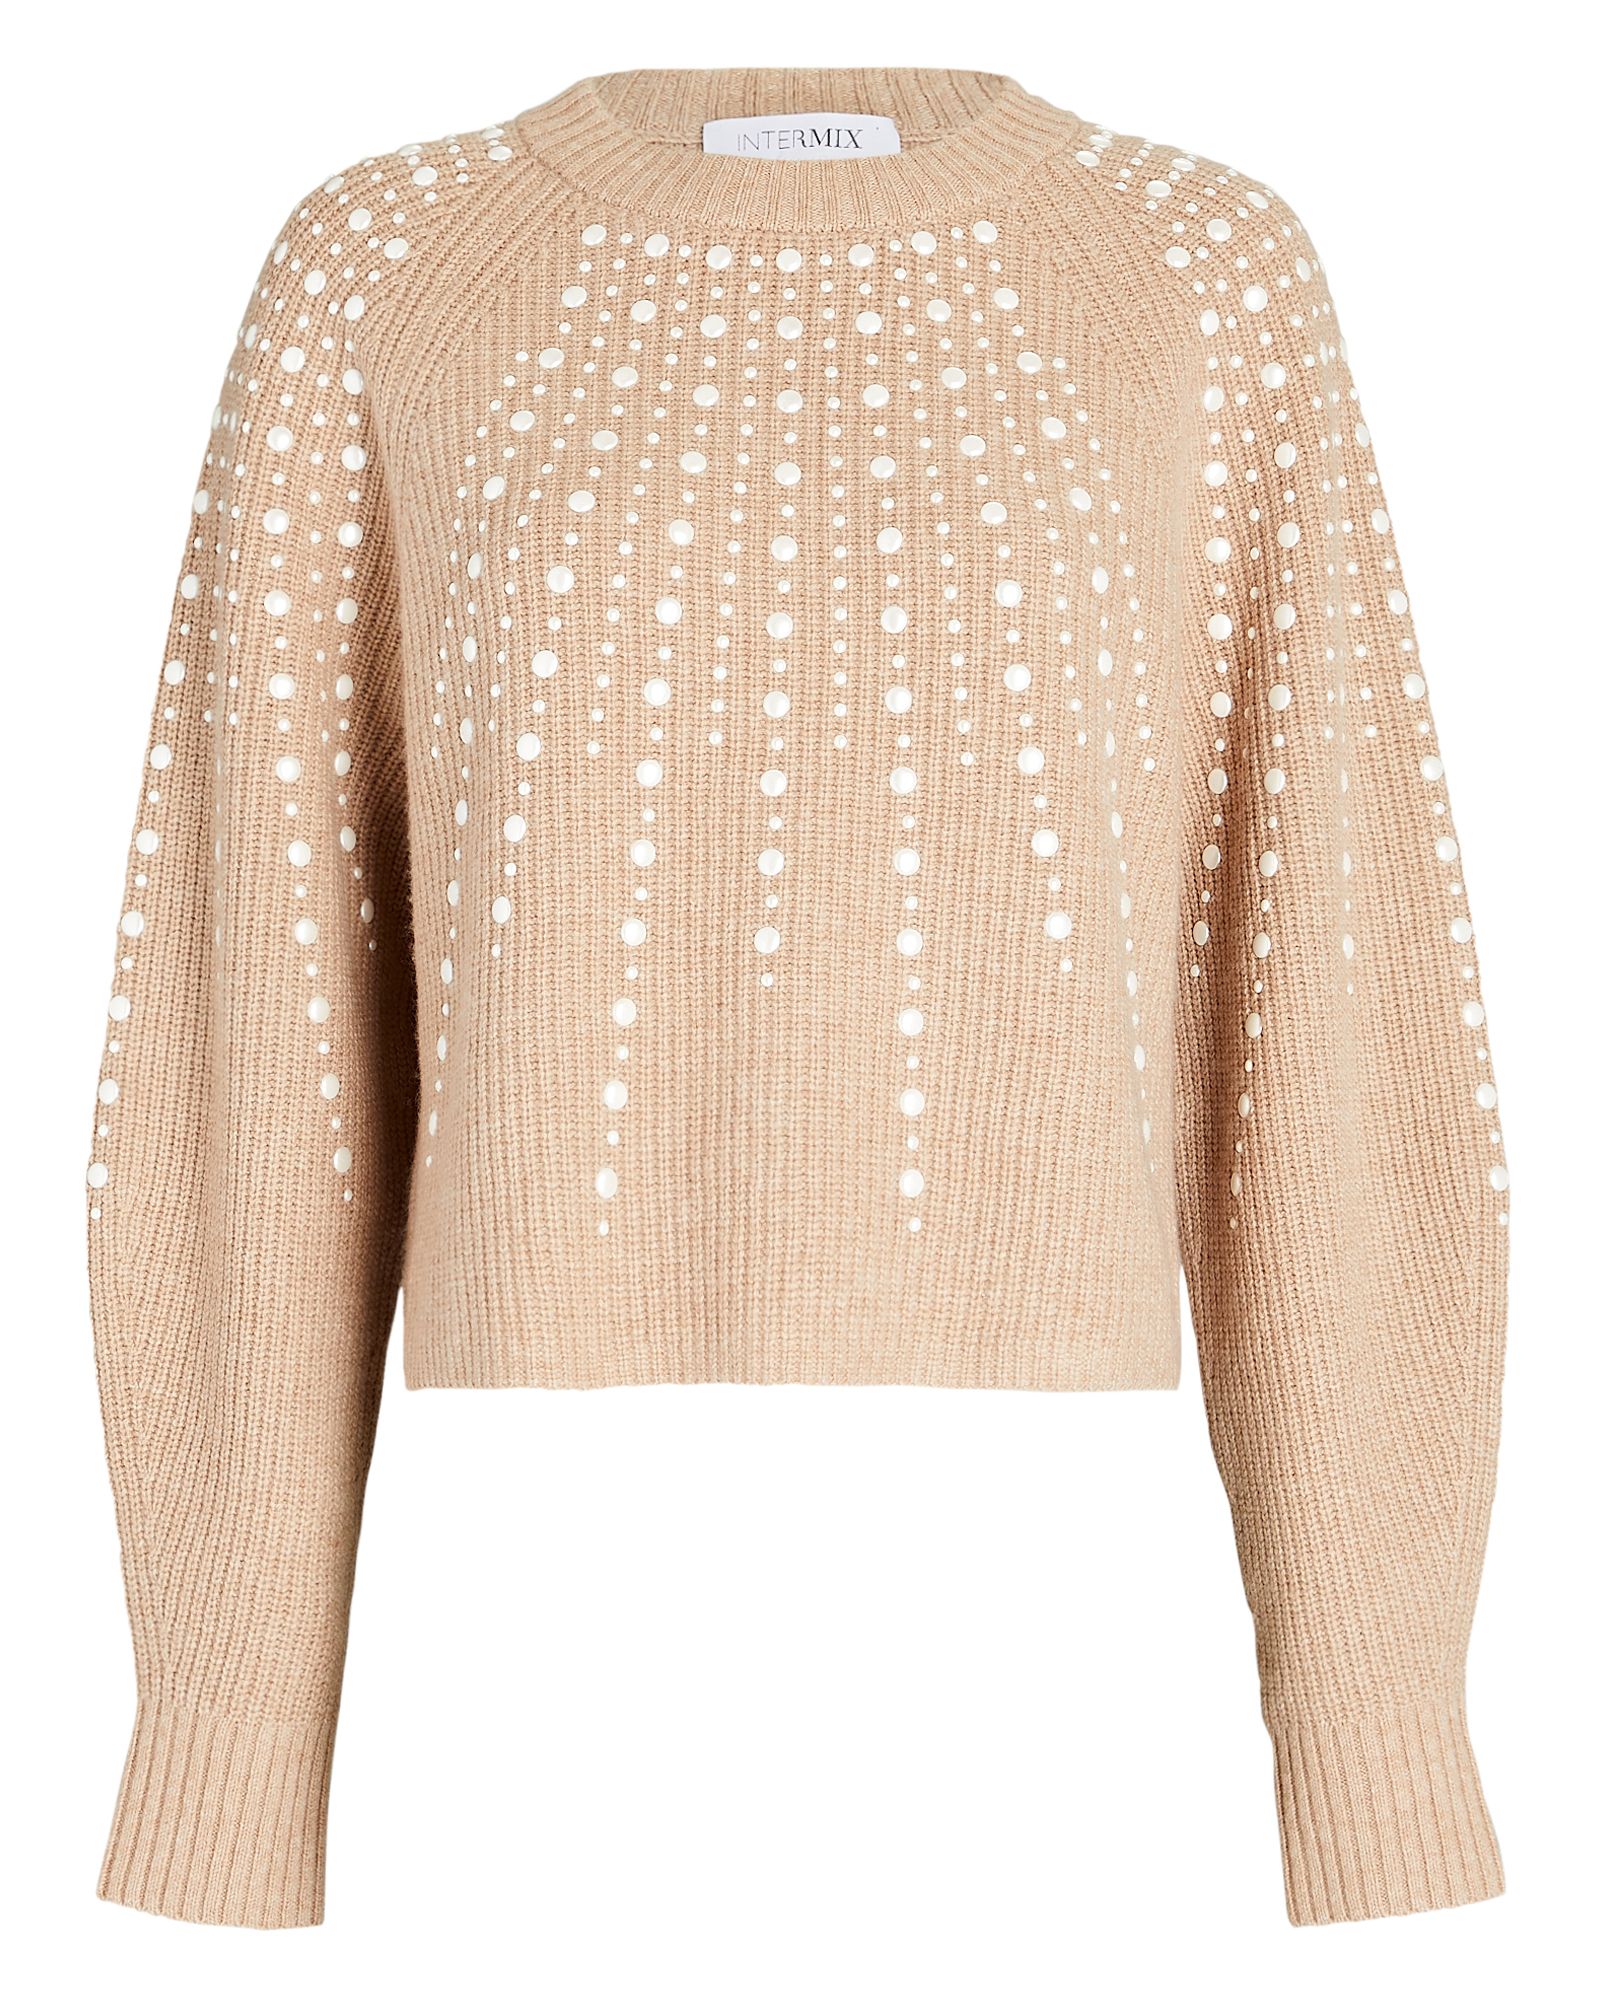 Bronte Embellished Wool-Cashmere Sweater | INTERMIX